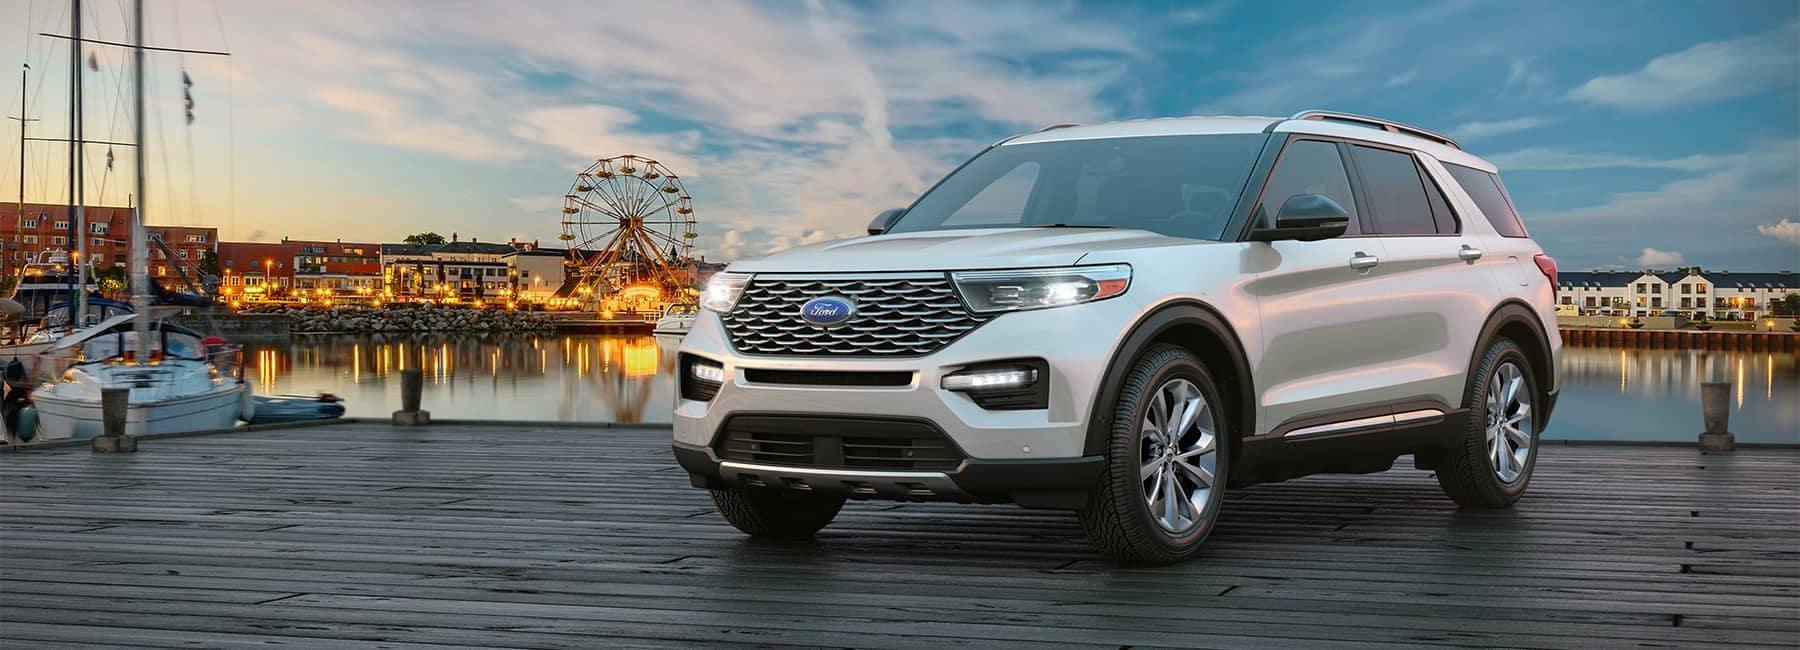 White 2021 Ford Explorer parked on a boardwalk with a ferris wheel in the background